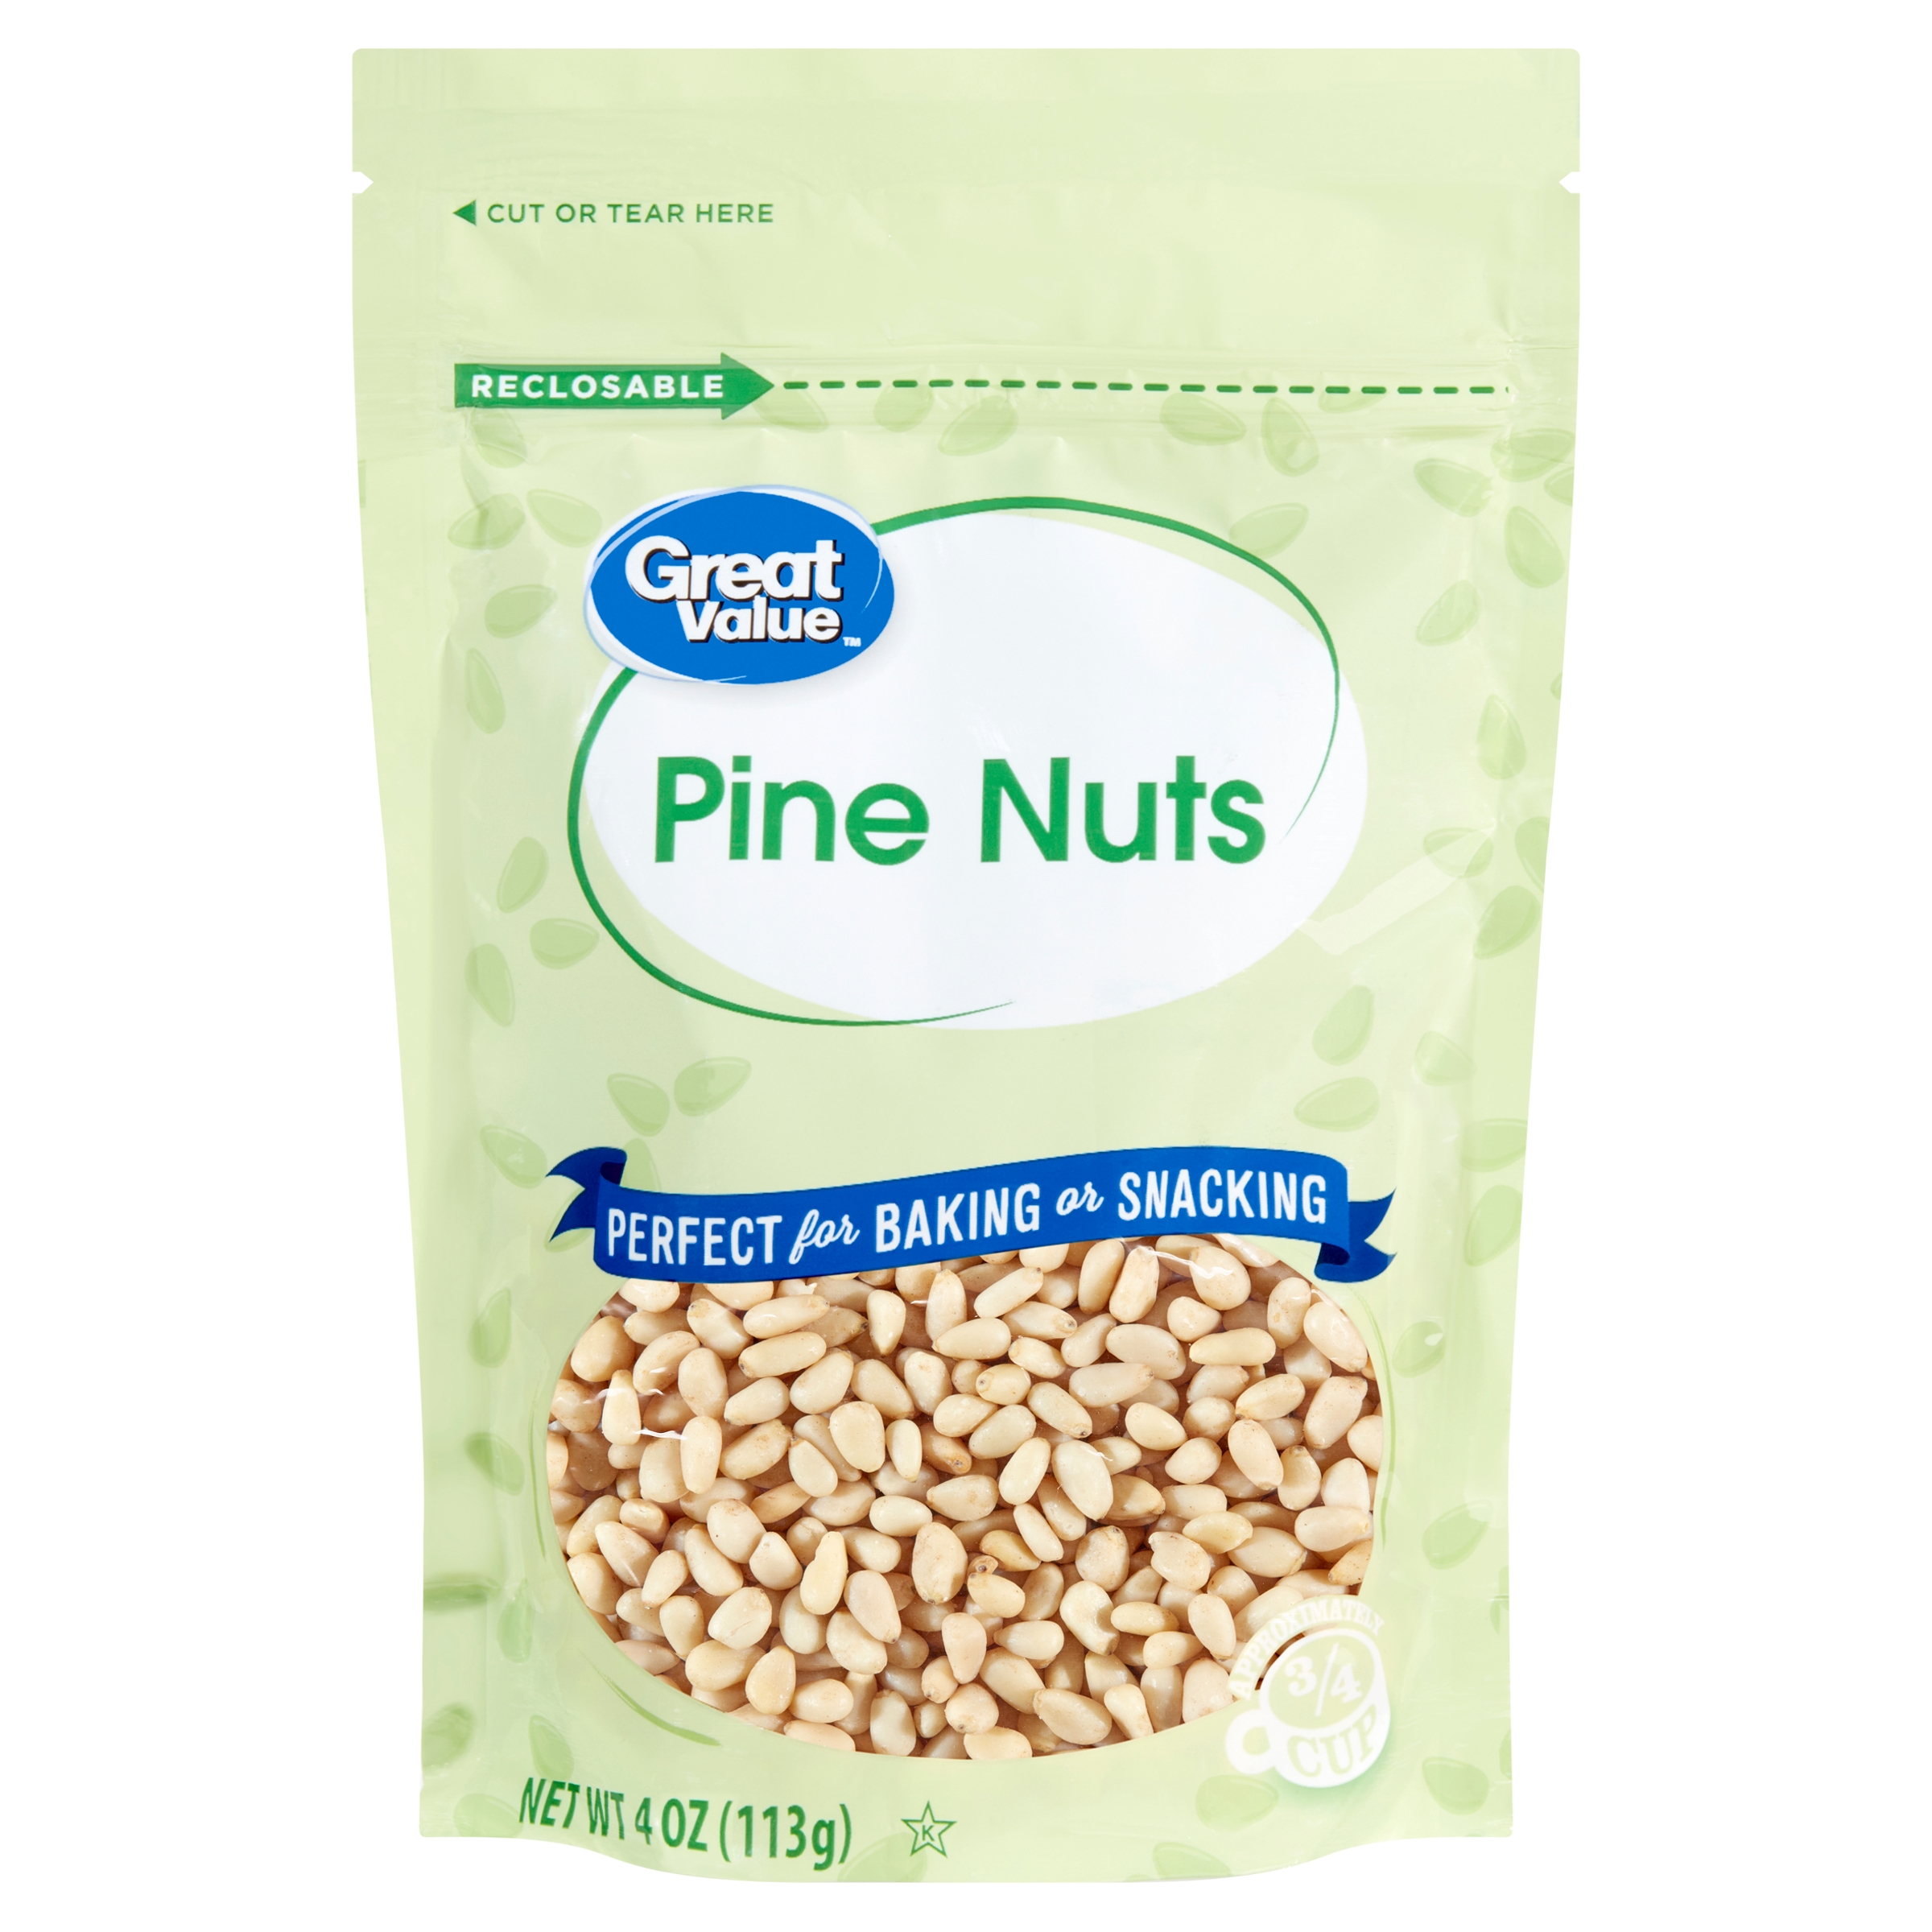 Great Value Pine Nuts, 4 oz - image 1 of 8